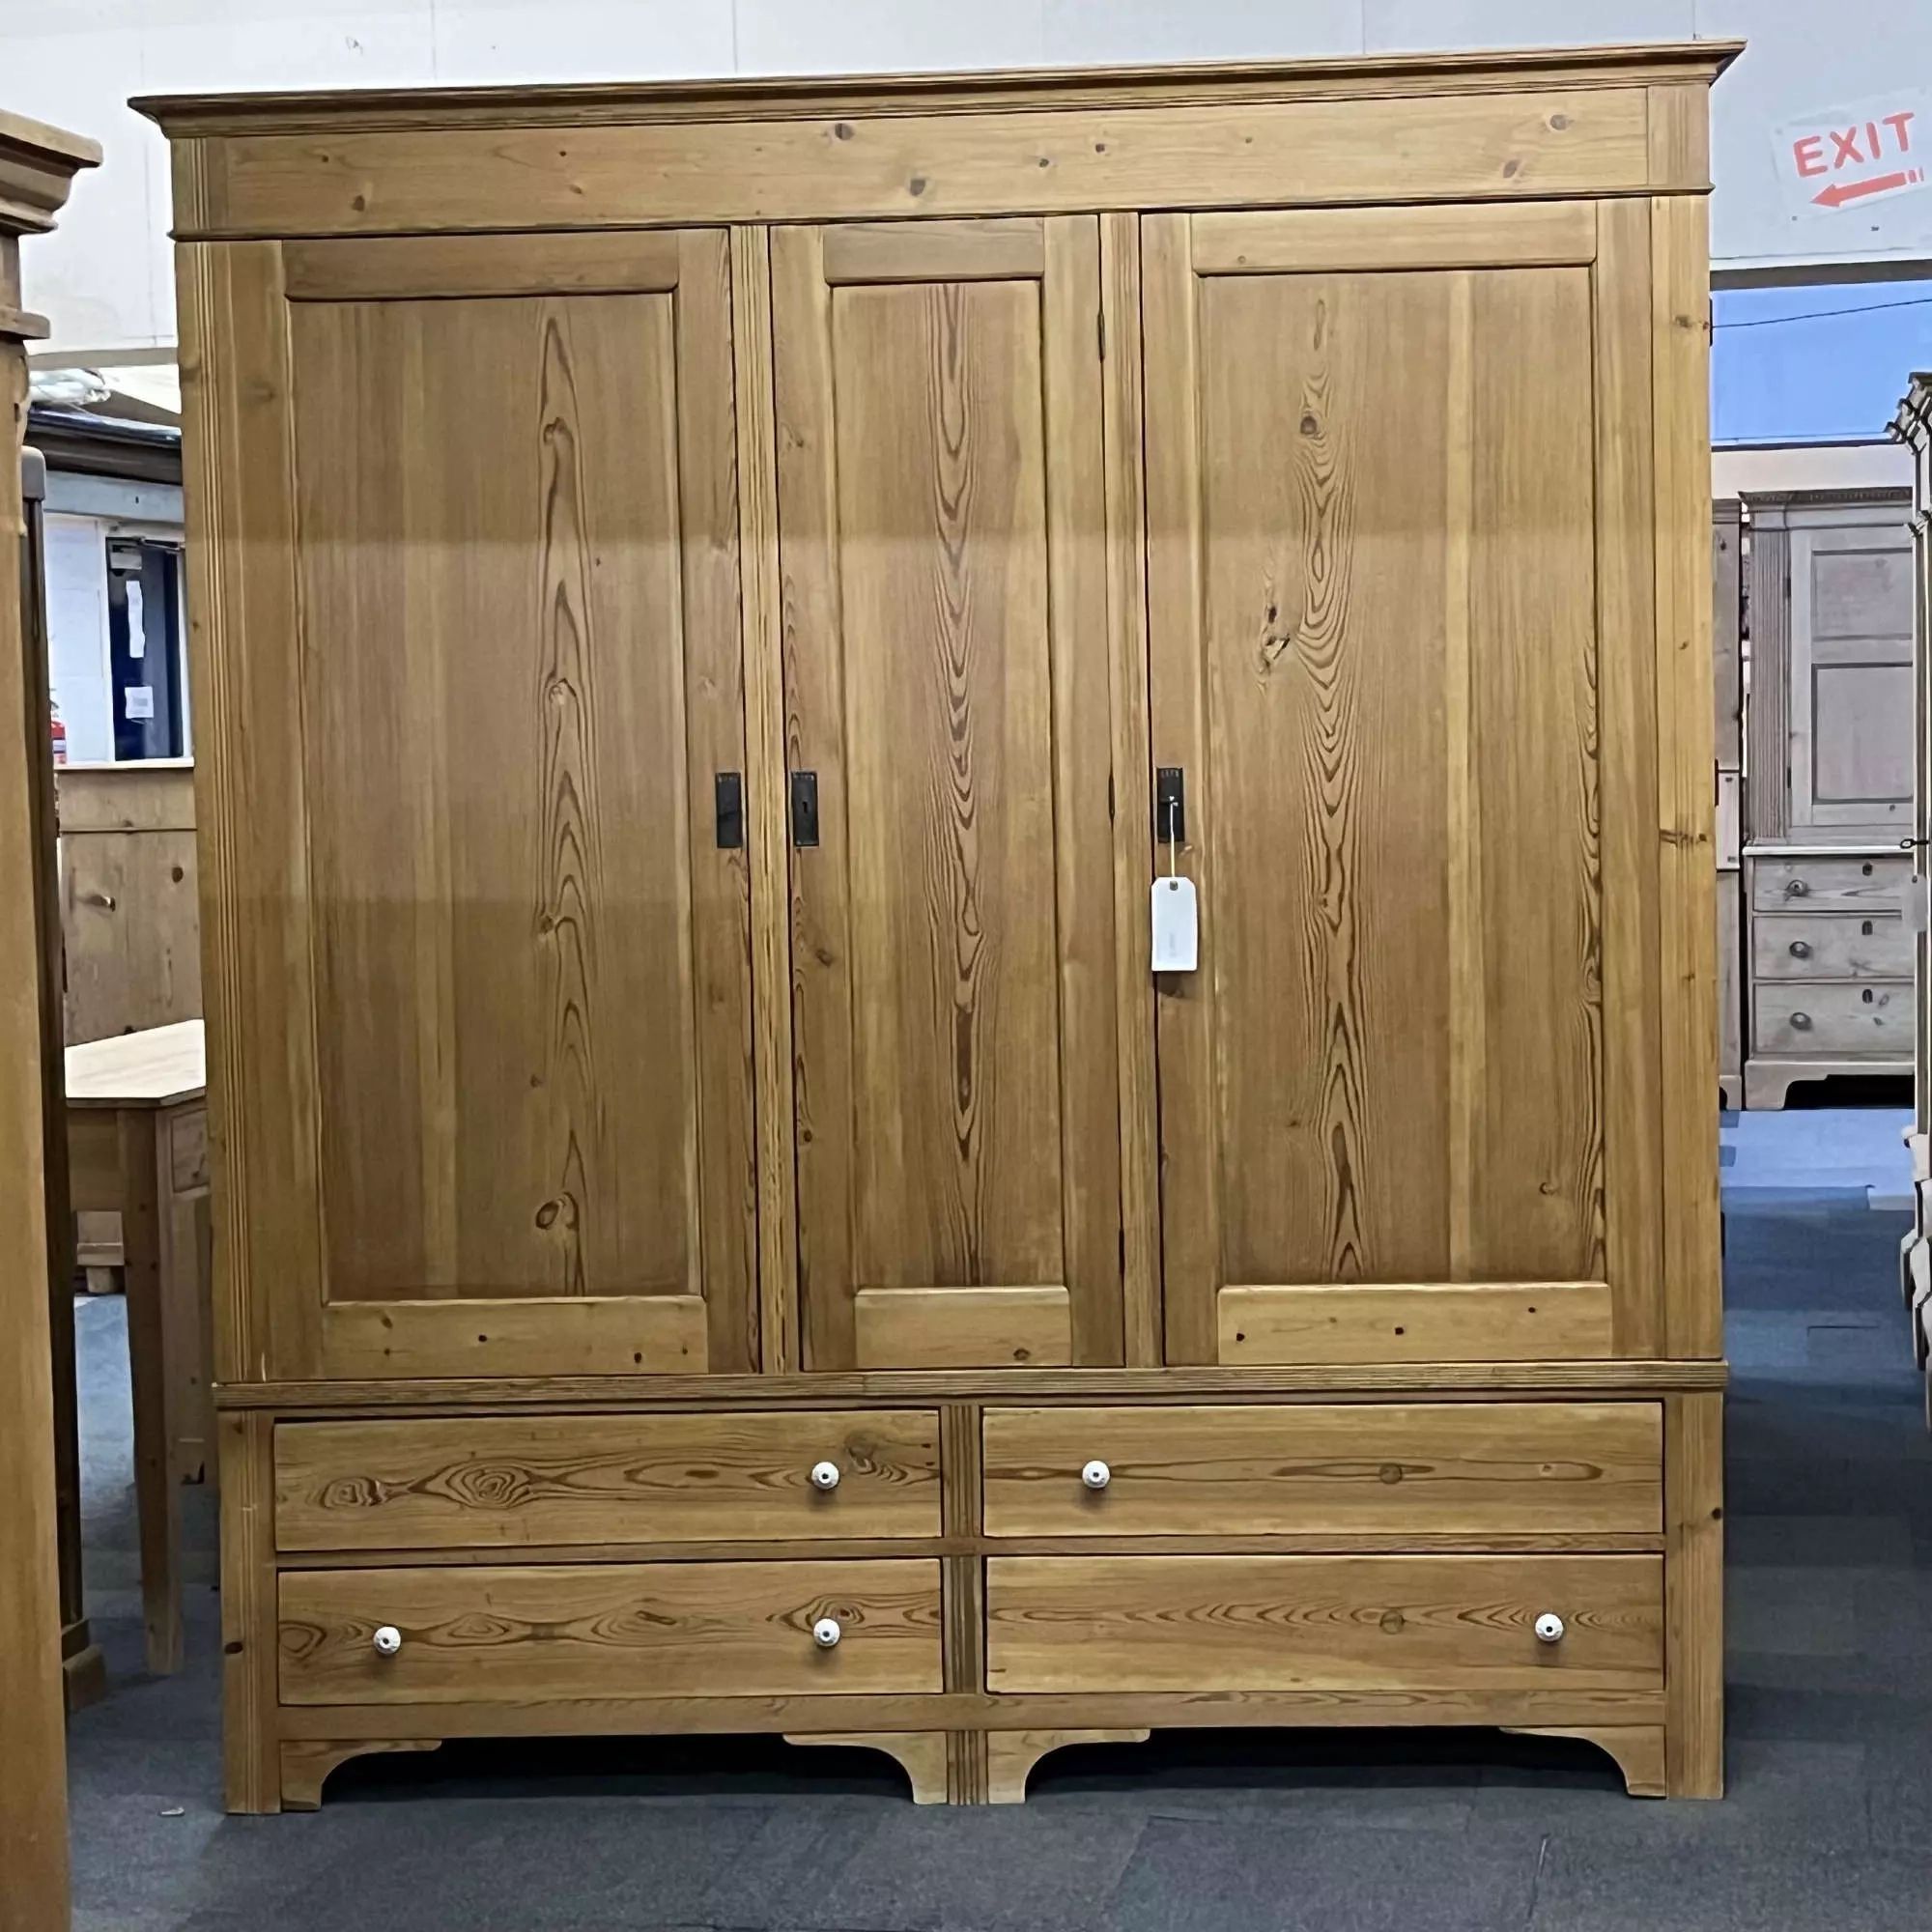 Xtremely Large East German Triple Antique Pine Wardrobe With 4 Drawers  (dismantles) In Antique Wardrobes & Armoires In Antique Triple Wardrobes (View 6 of 15)